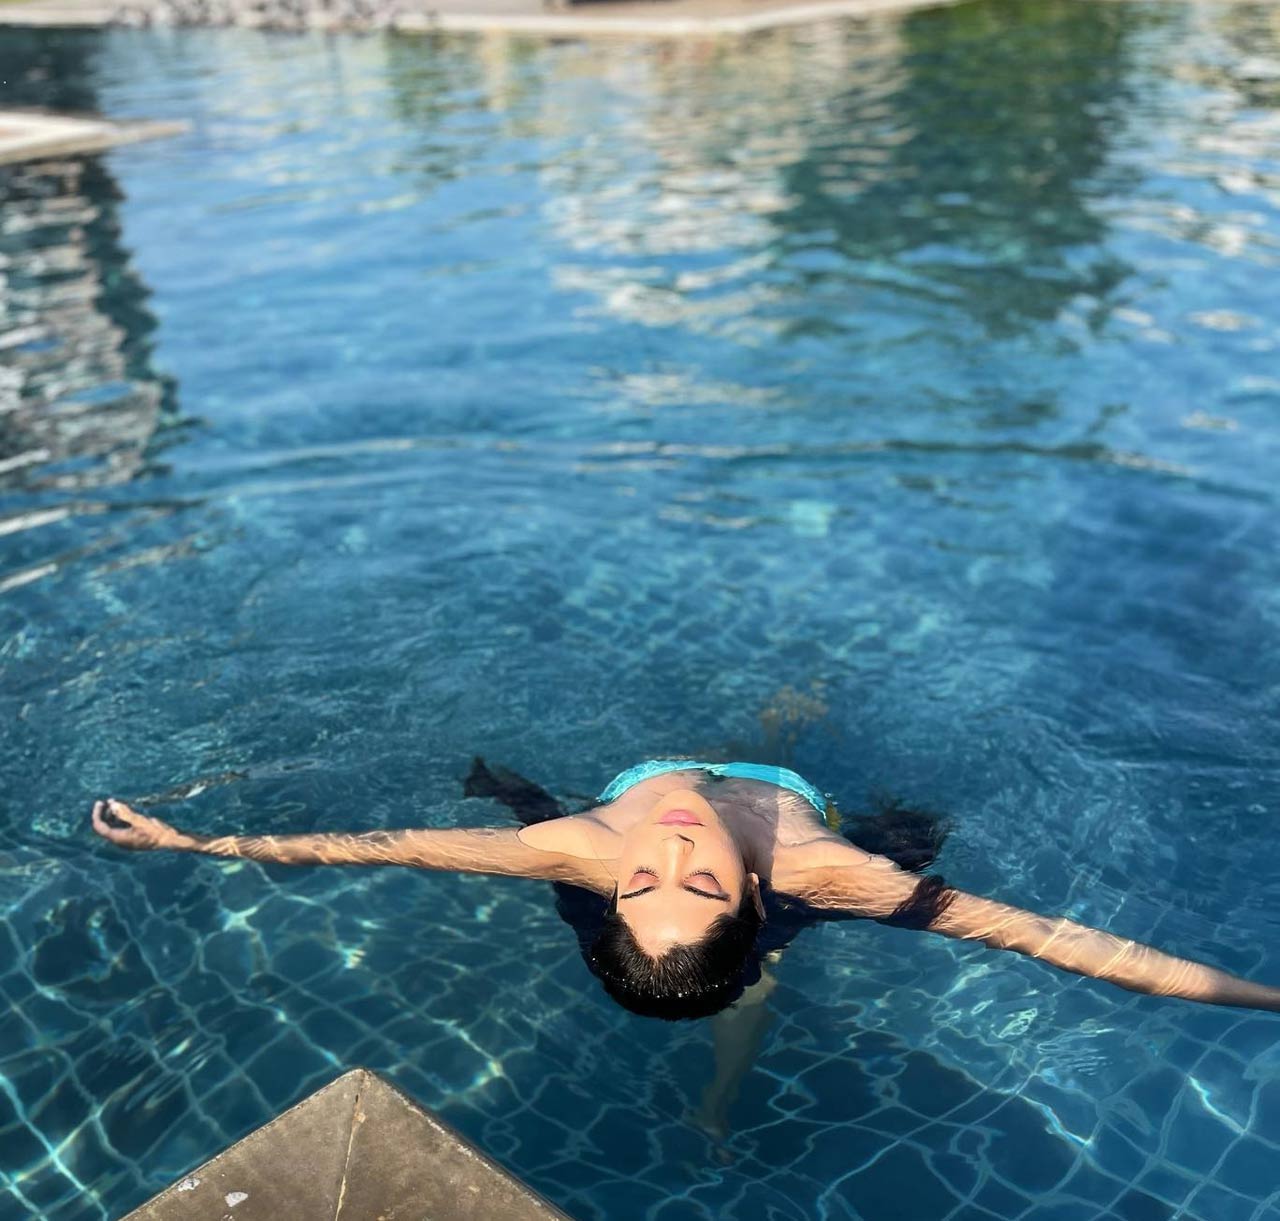 Aaditi S Pohankar enjoys her time in the pool in this picture and it seems she's taking her much-needed time off